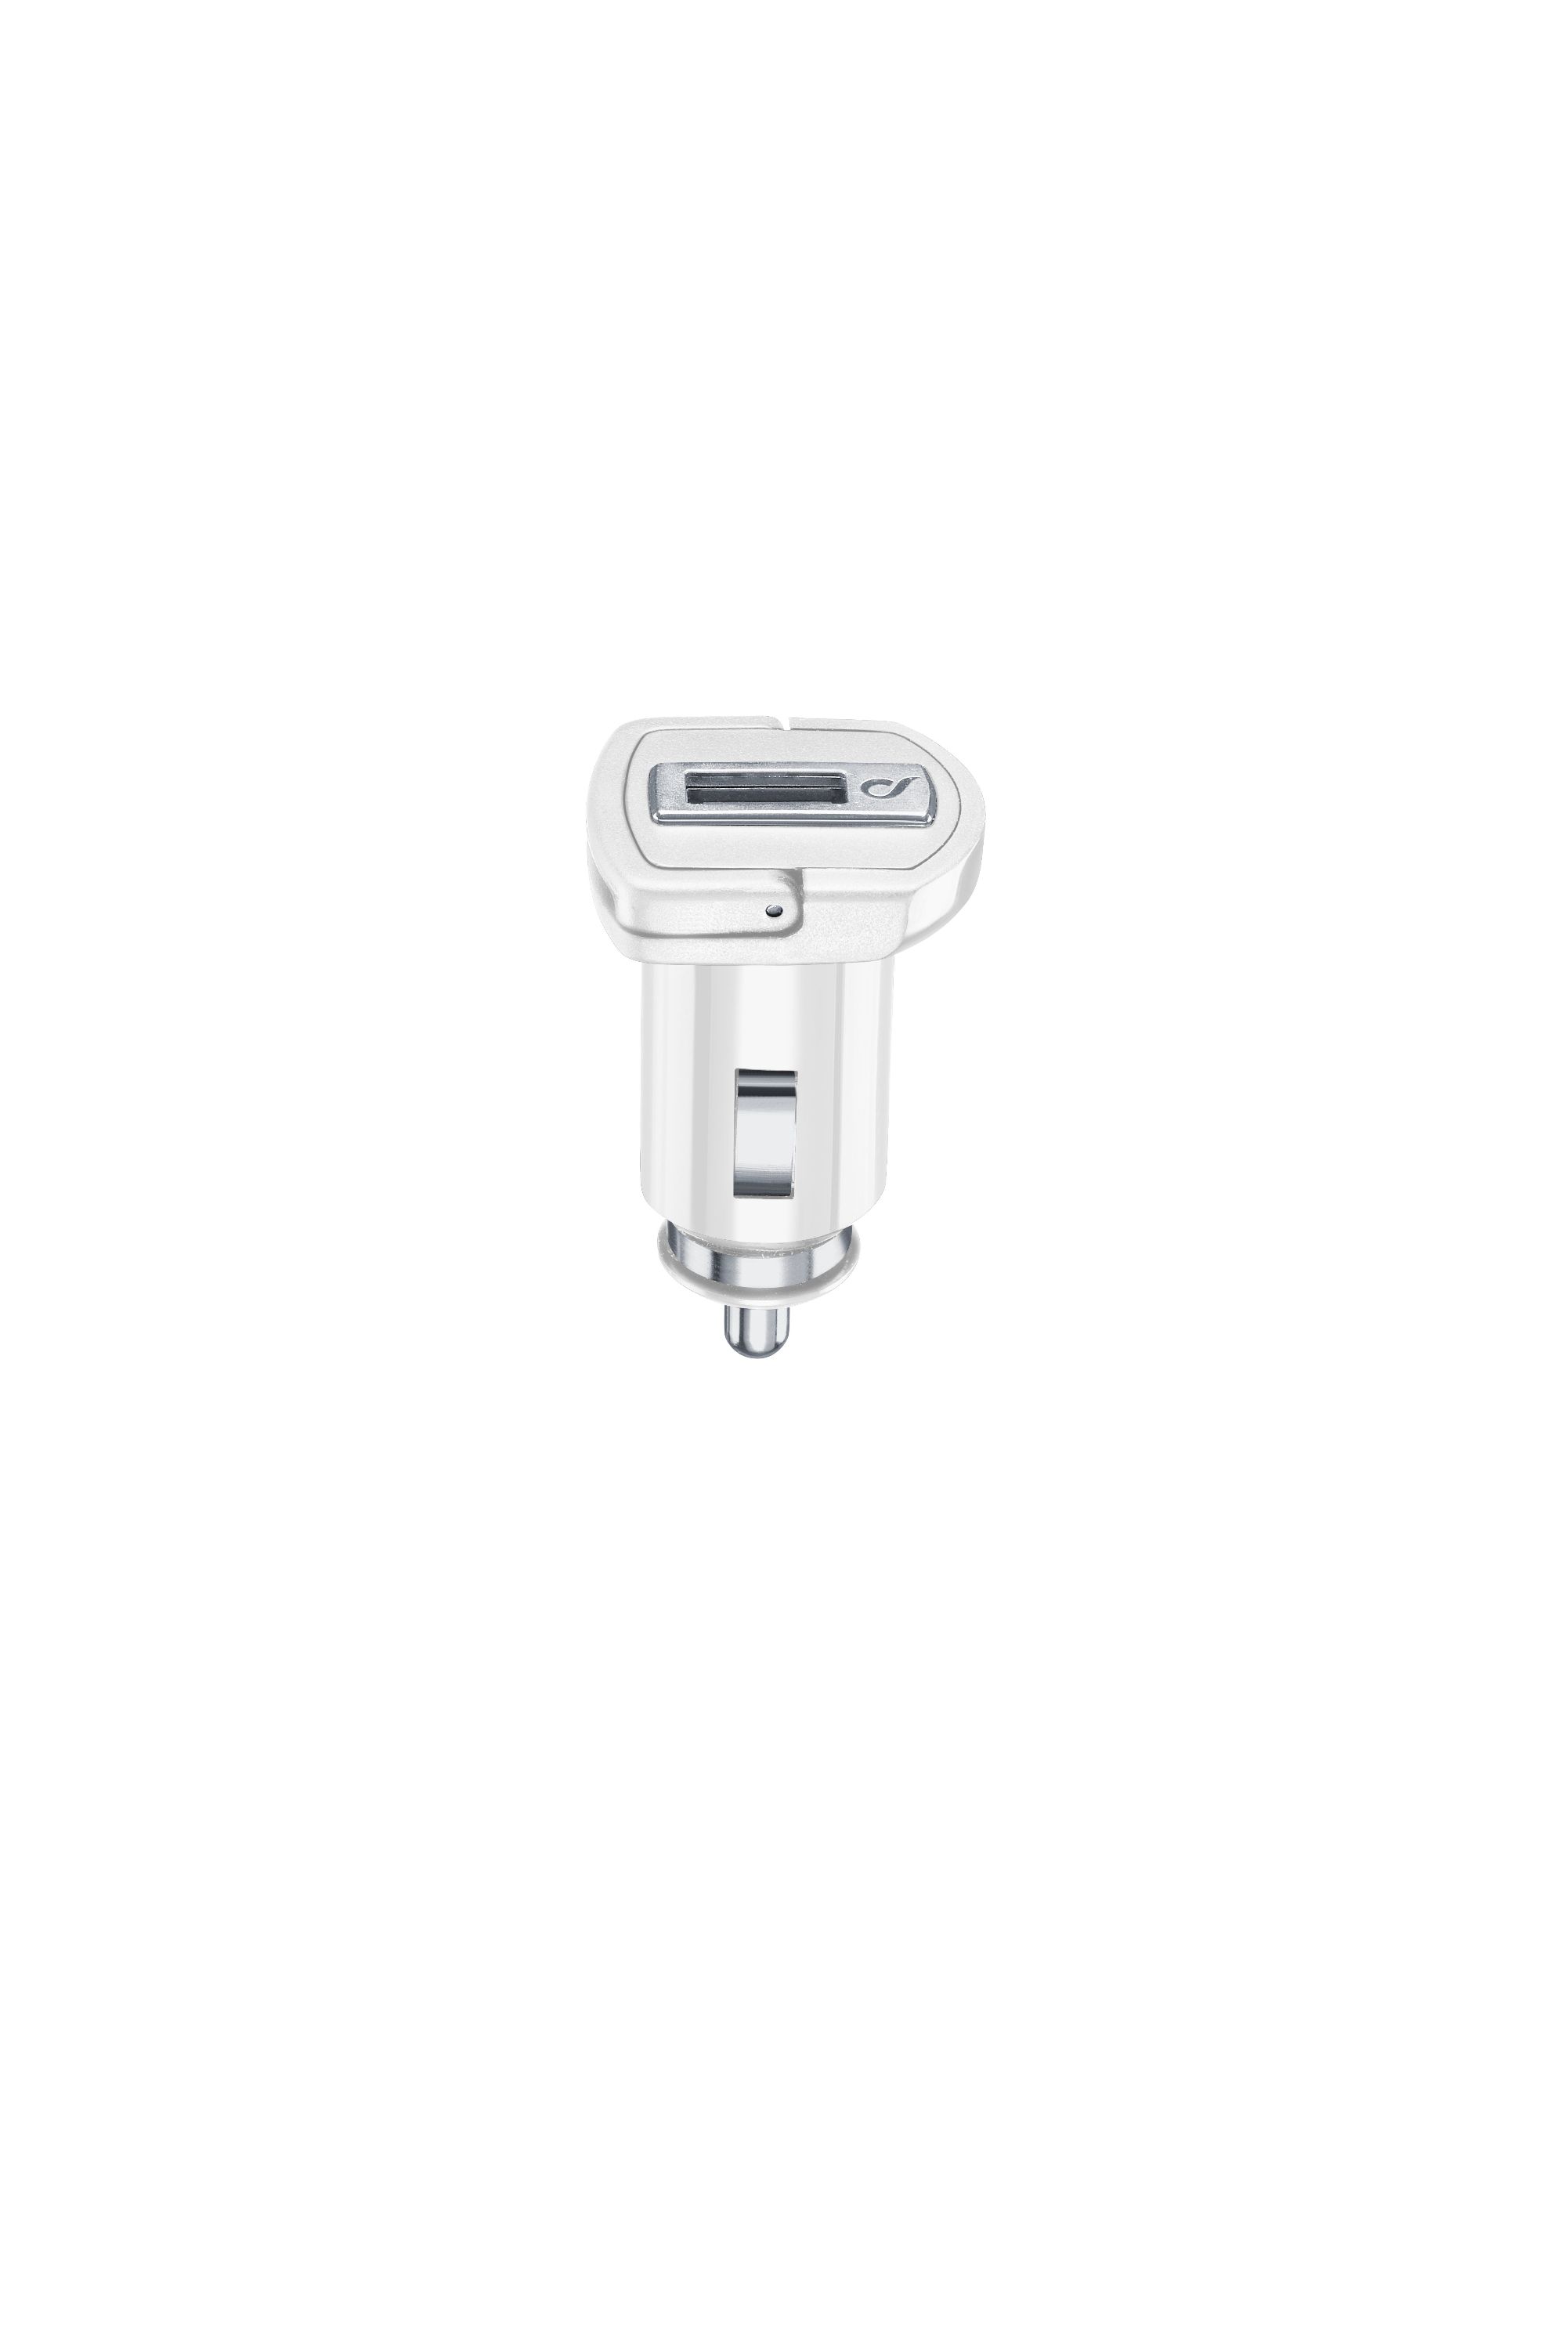 Chargeur voiture usb, 10W/2A Samsung, blanc